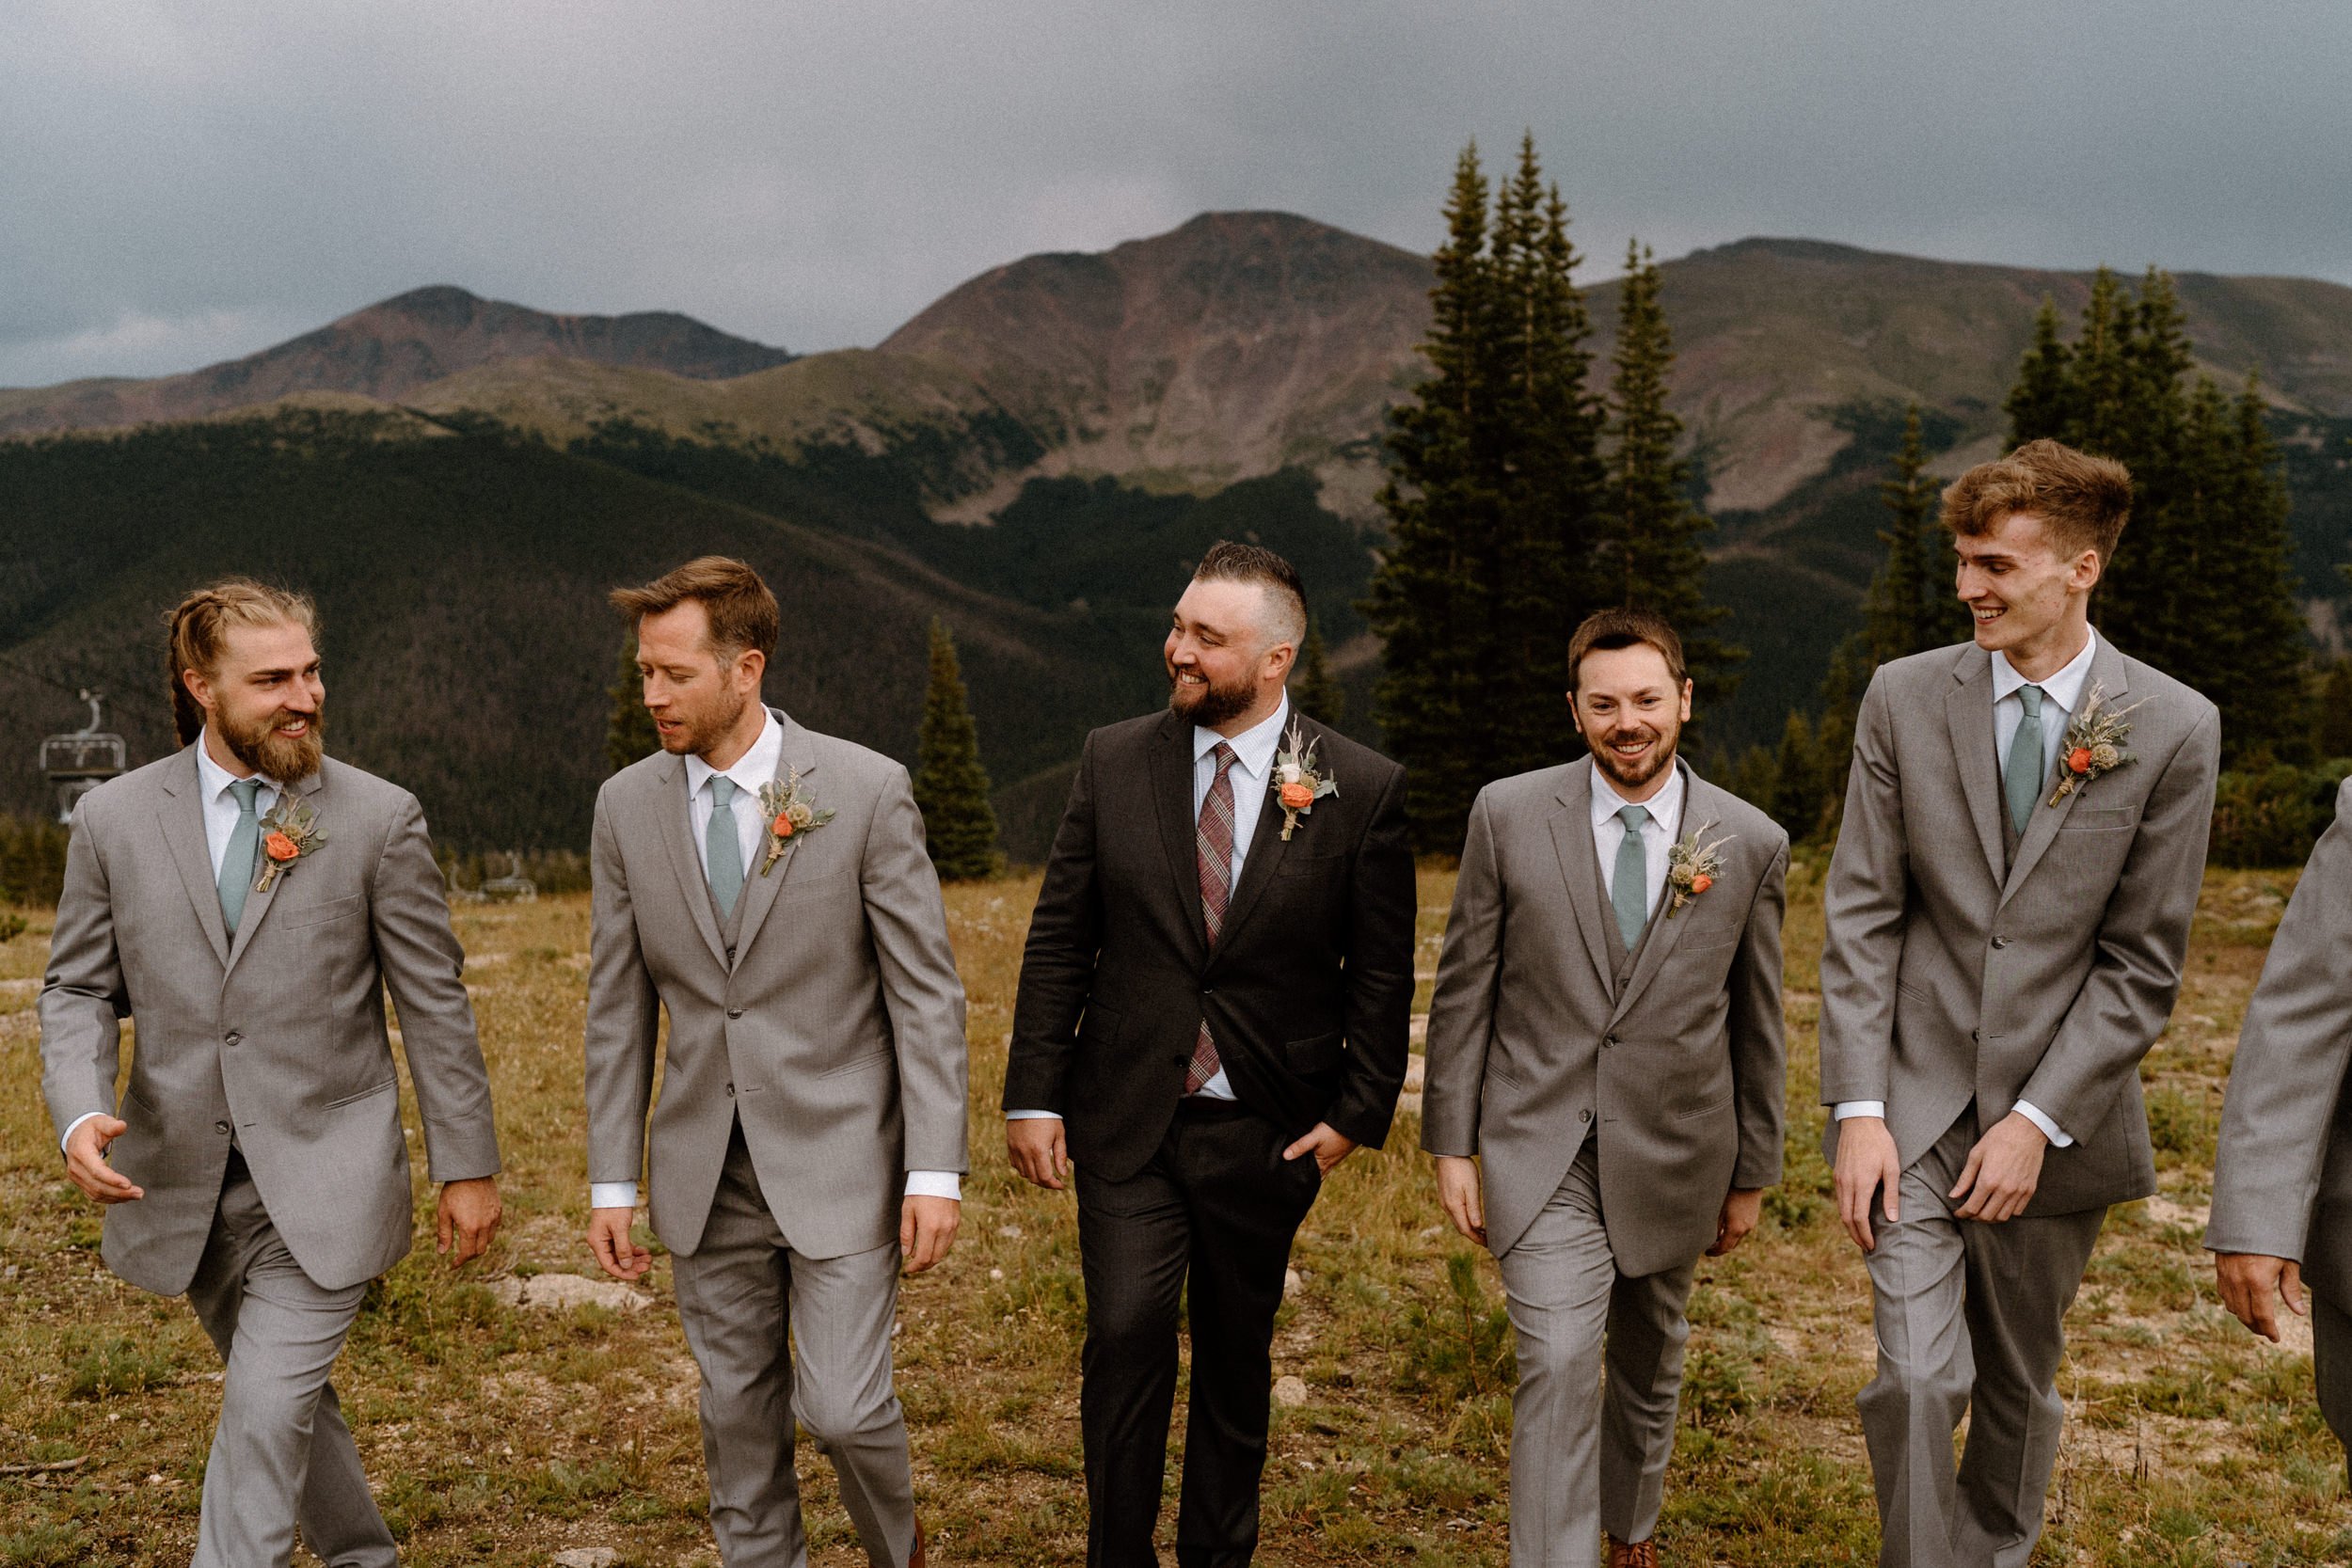 Groomsmen laugh and smile with each other